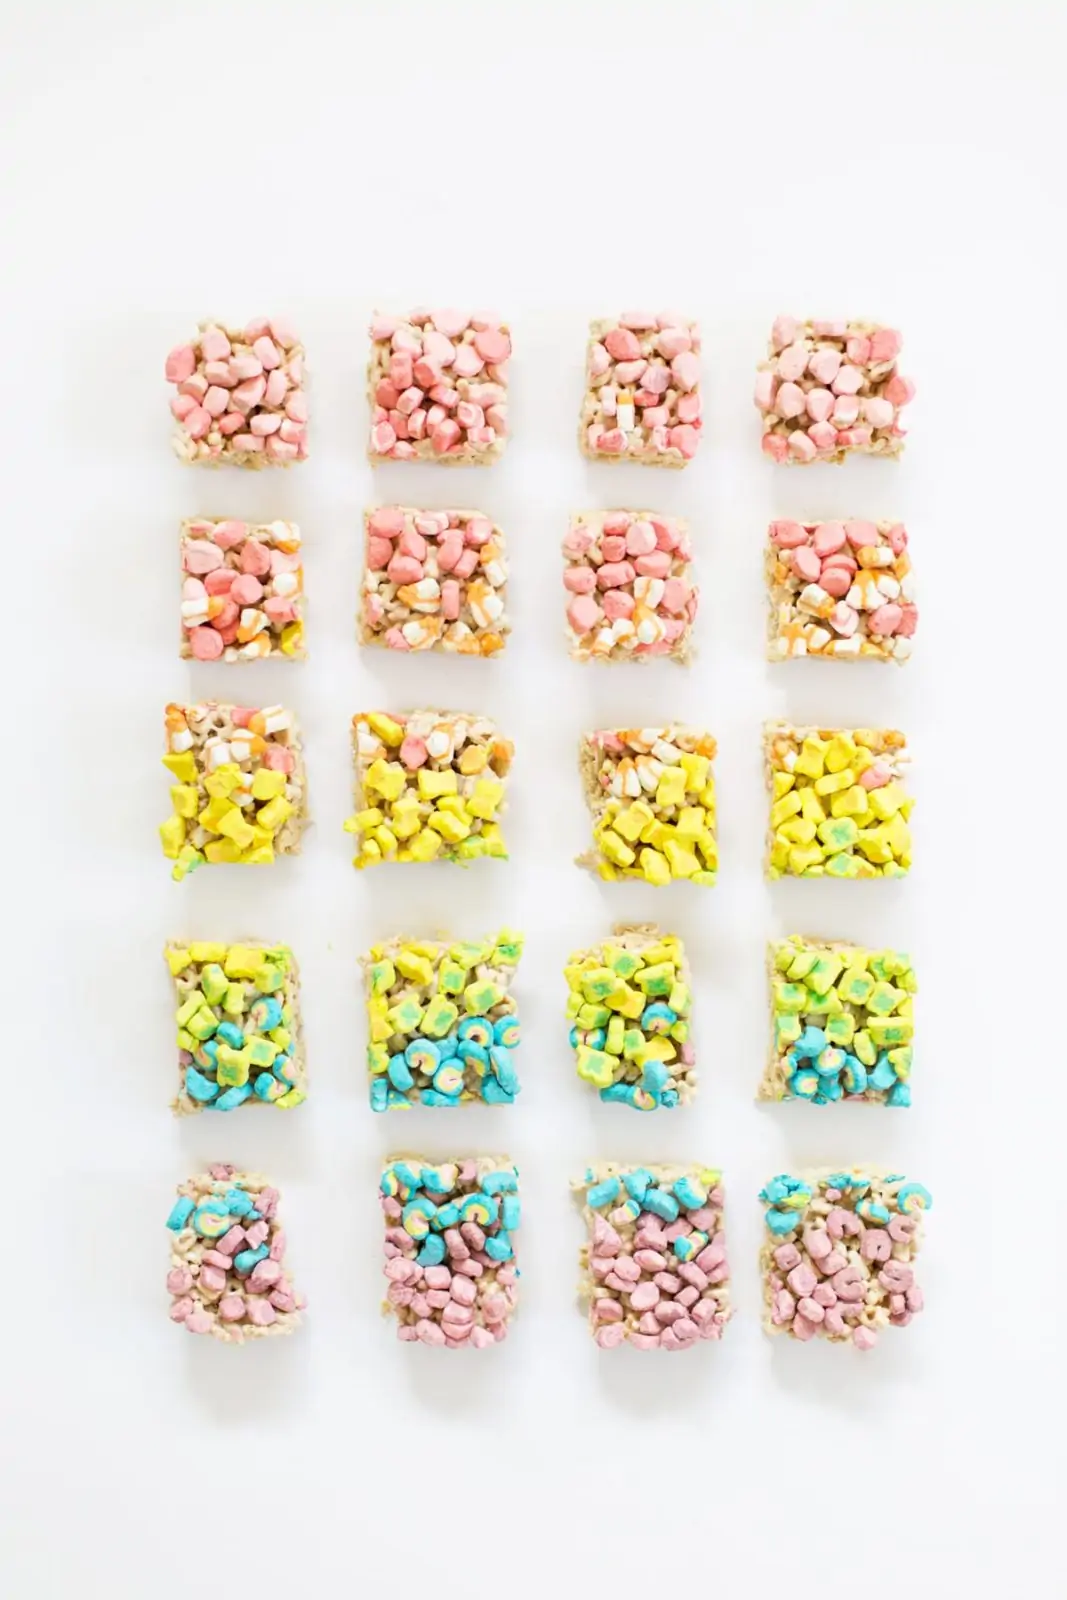 Lucky charms marshmallow treats lovely indeed